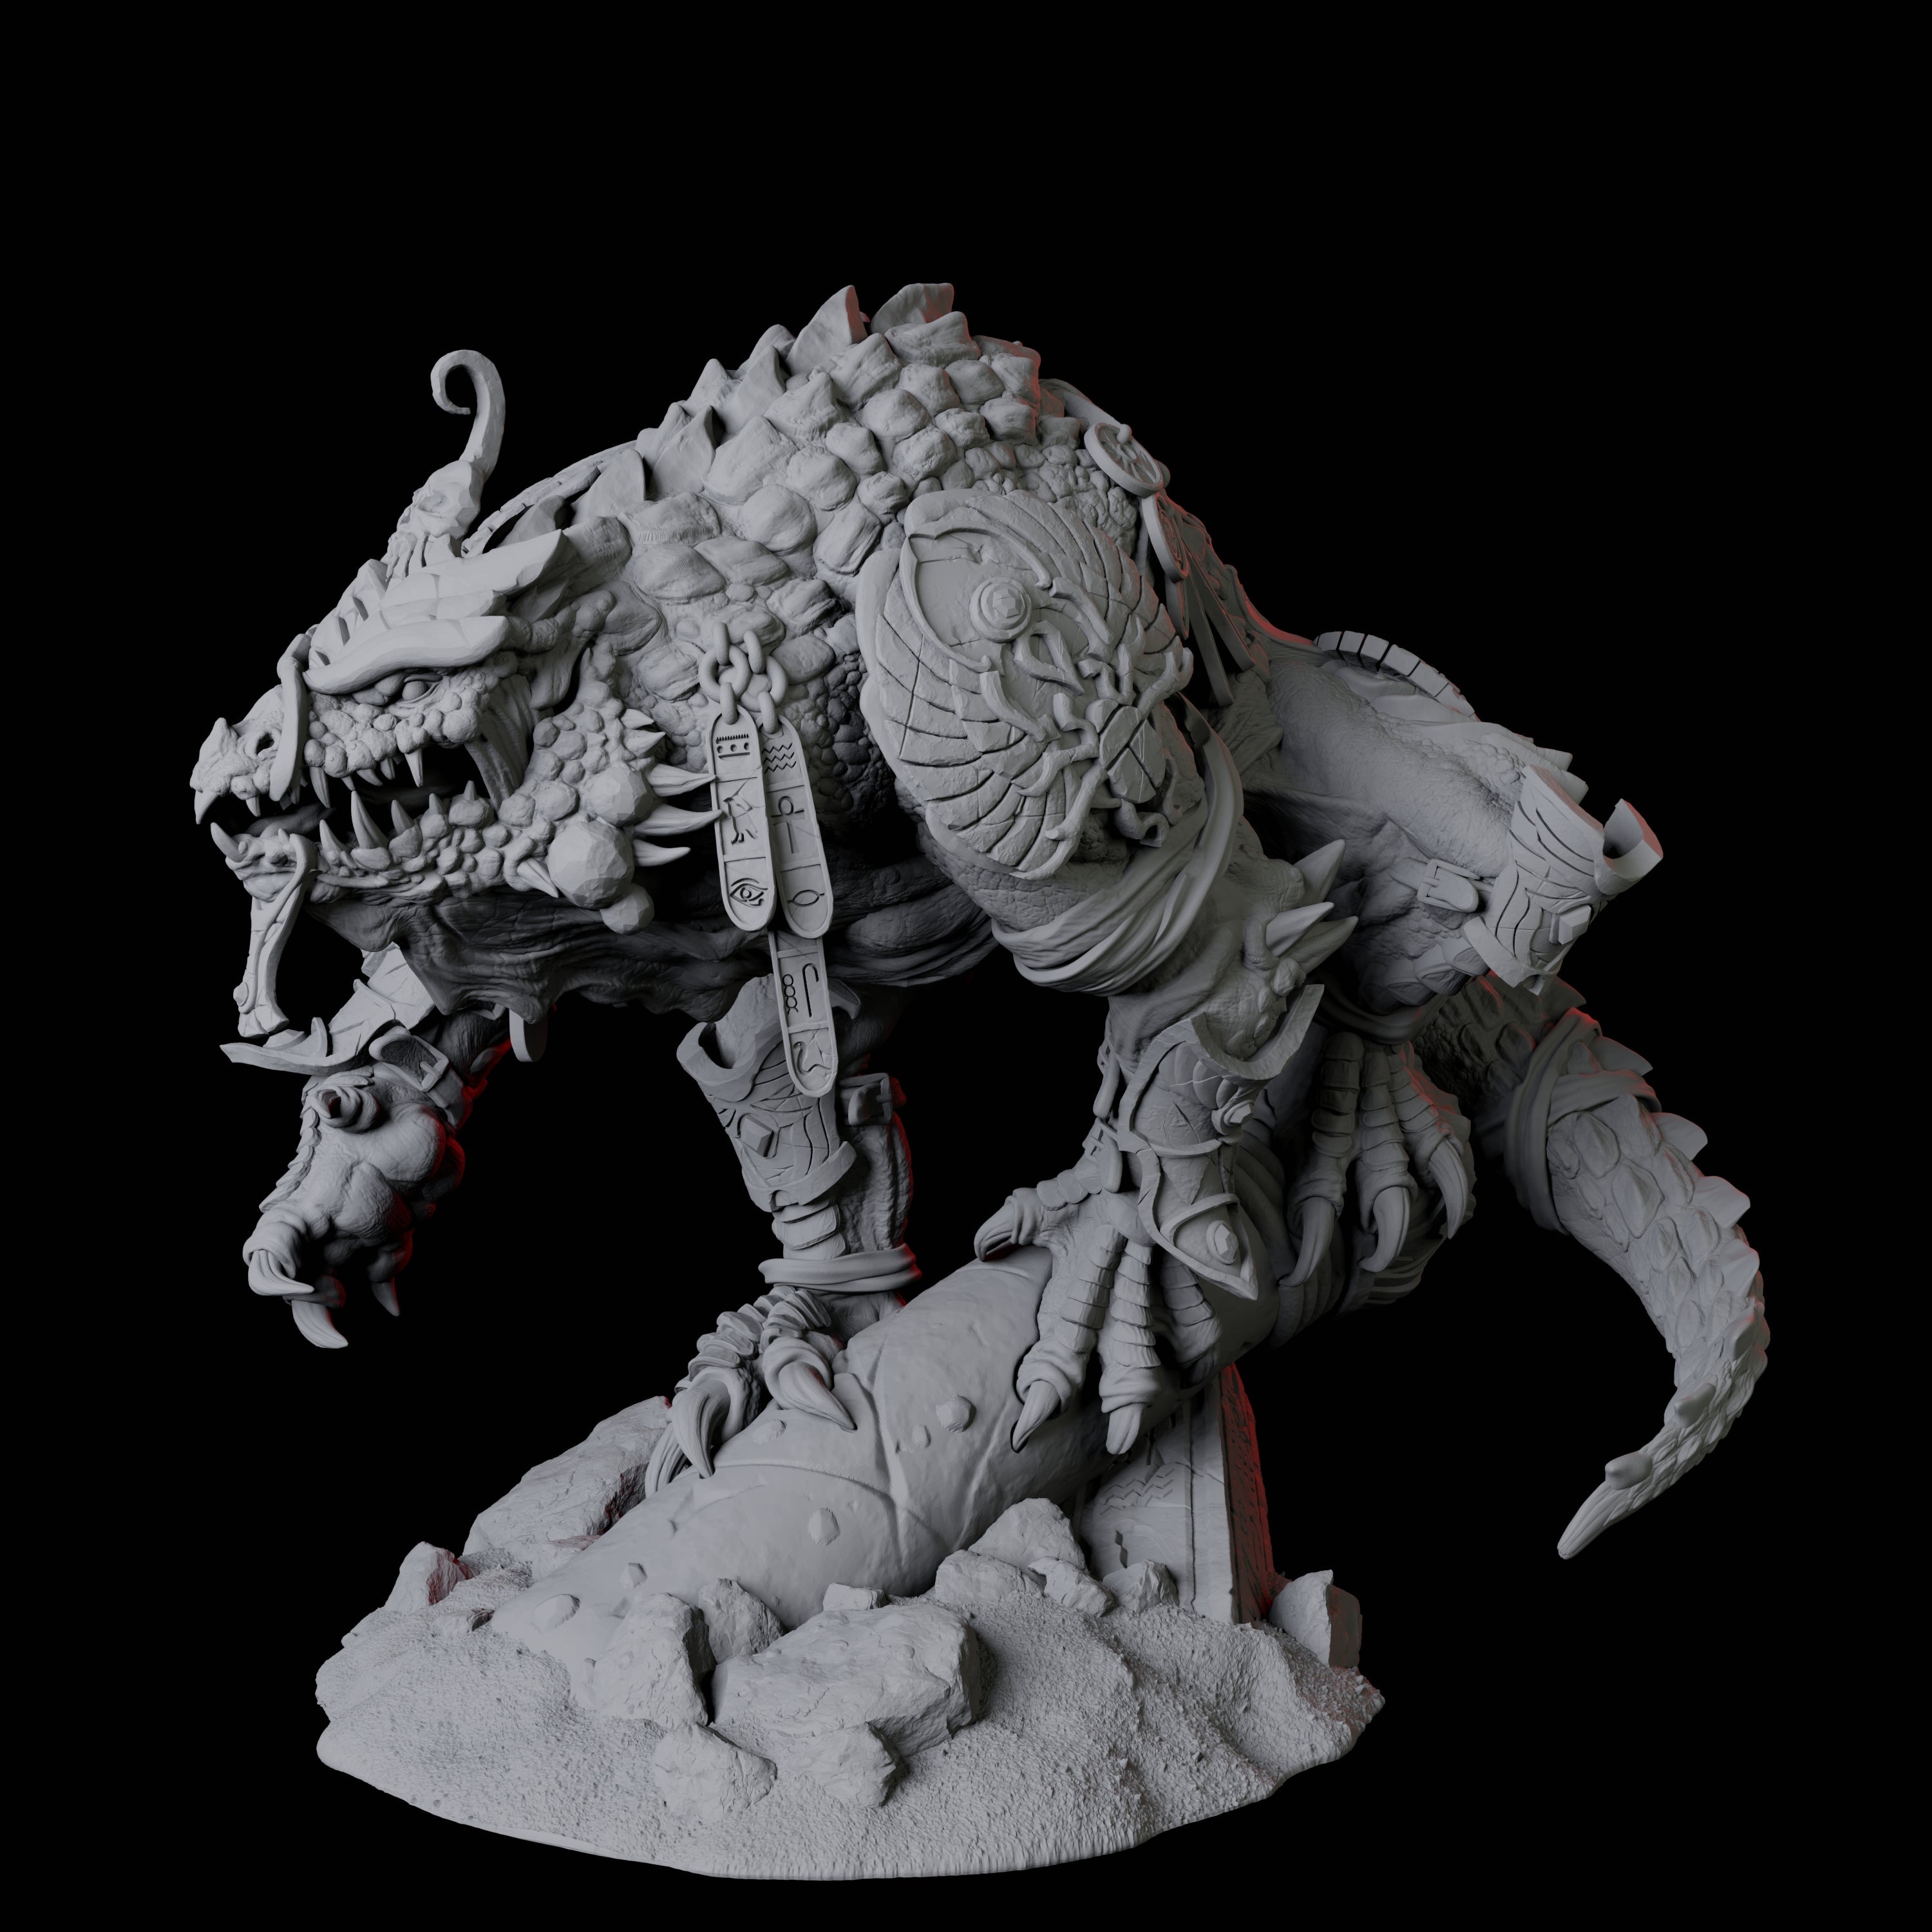 Crocodile Lizardfolk Warrior C Miniature for Dungeons and Dragons, Pathfinder or other TTRPGs